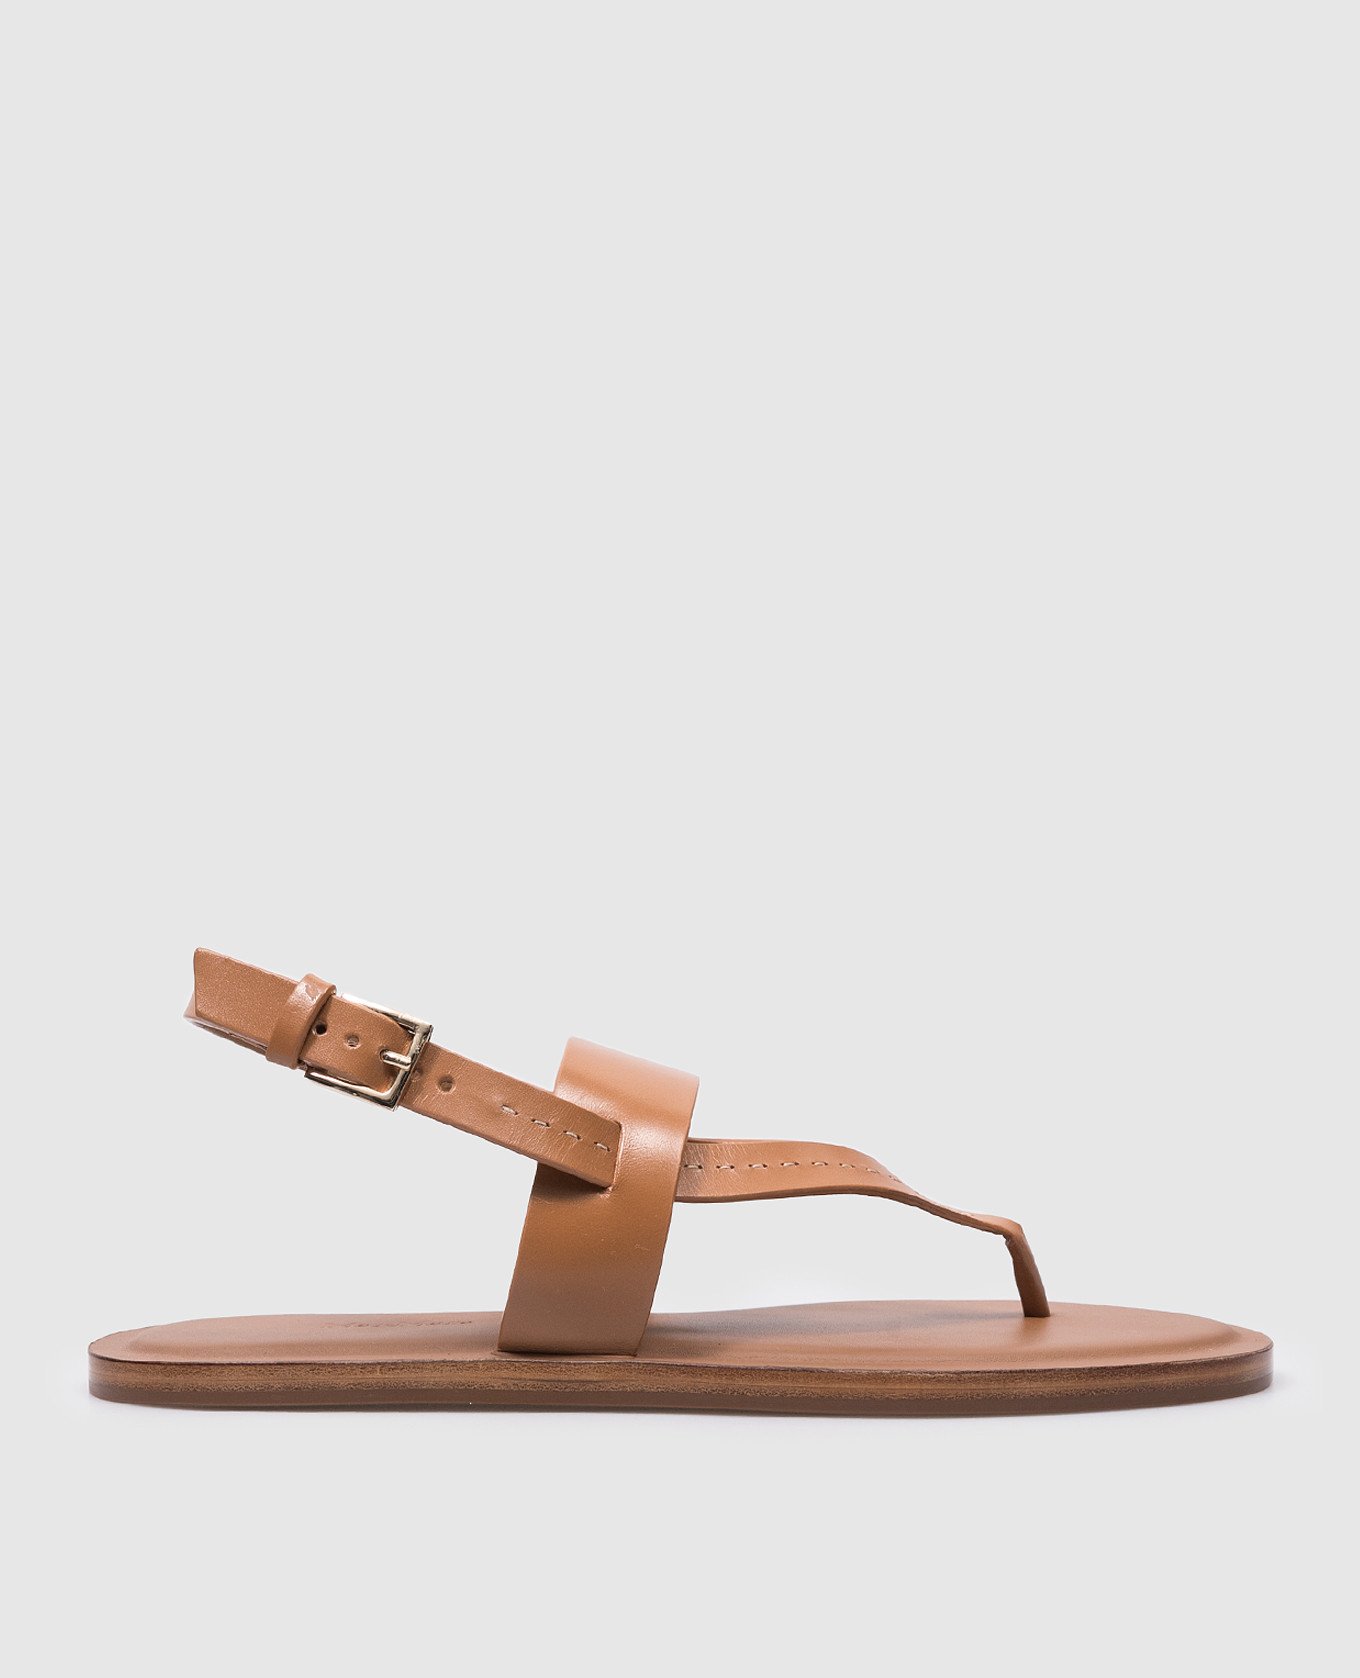 THONG STITCH brown leather sandals